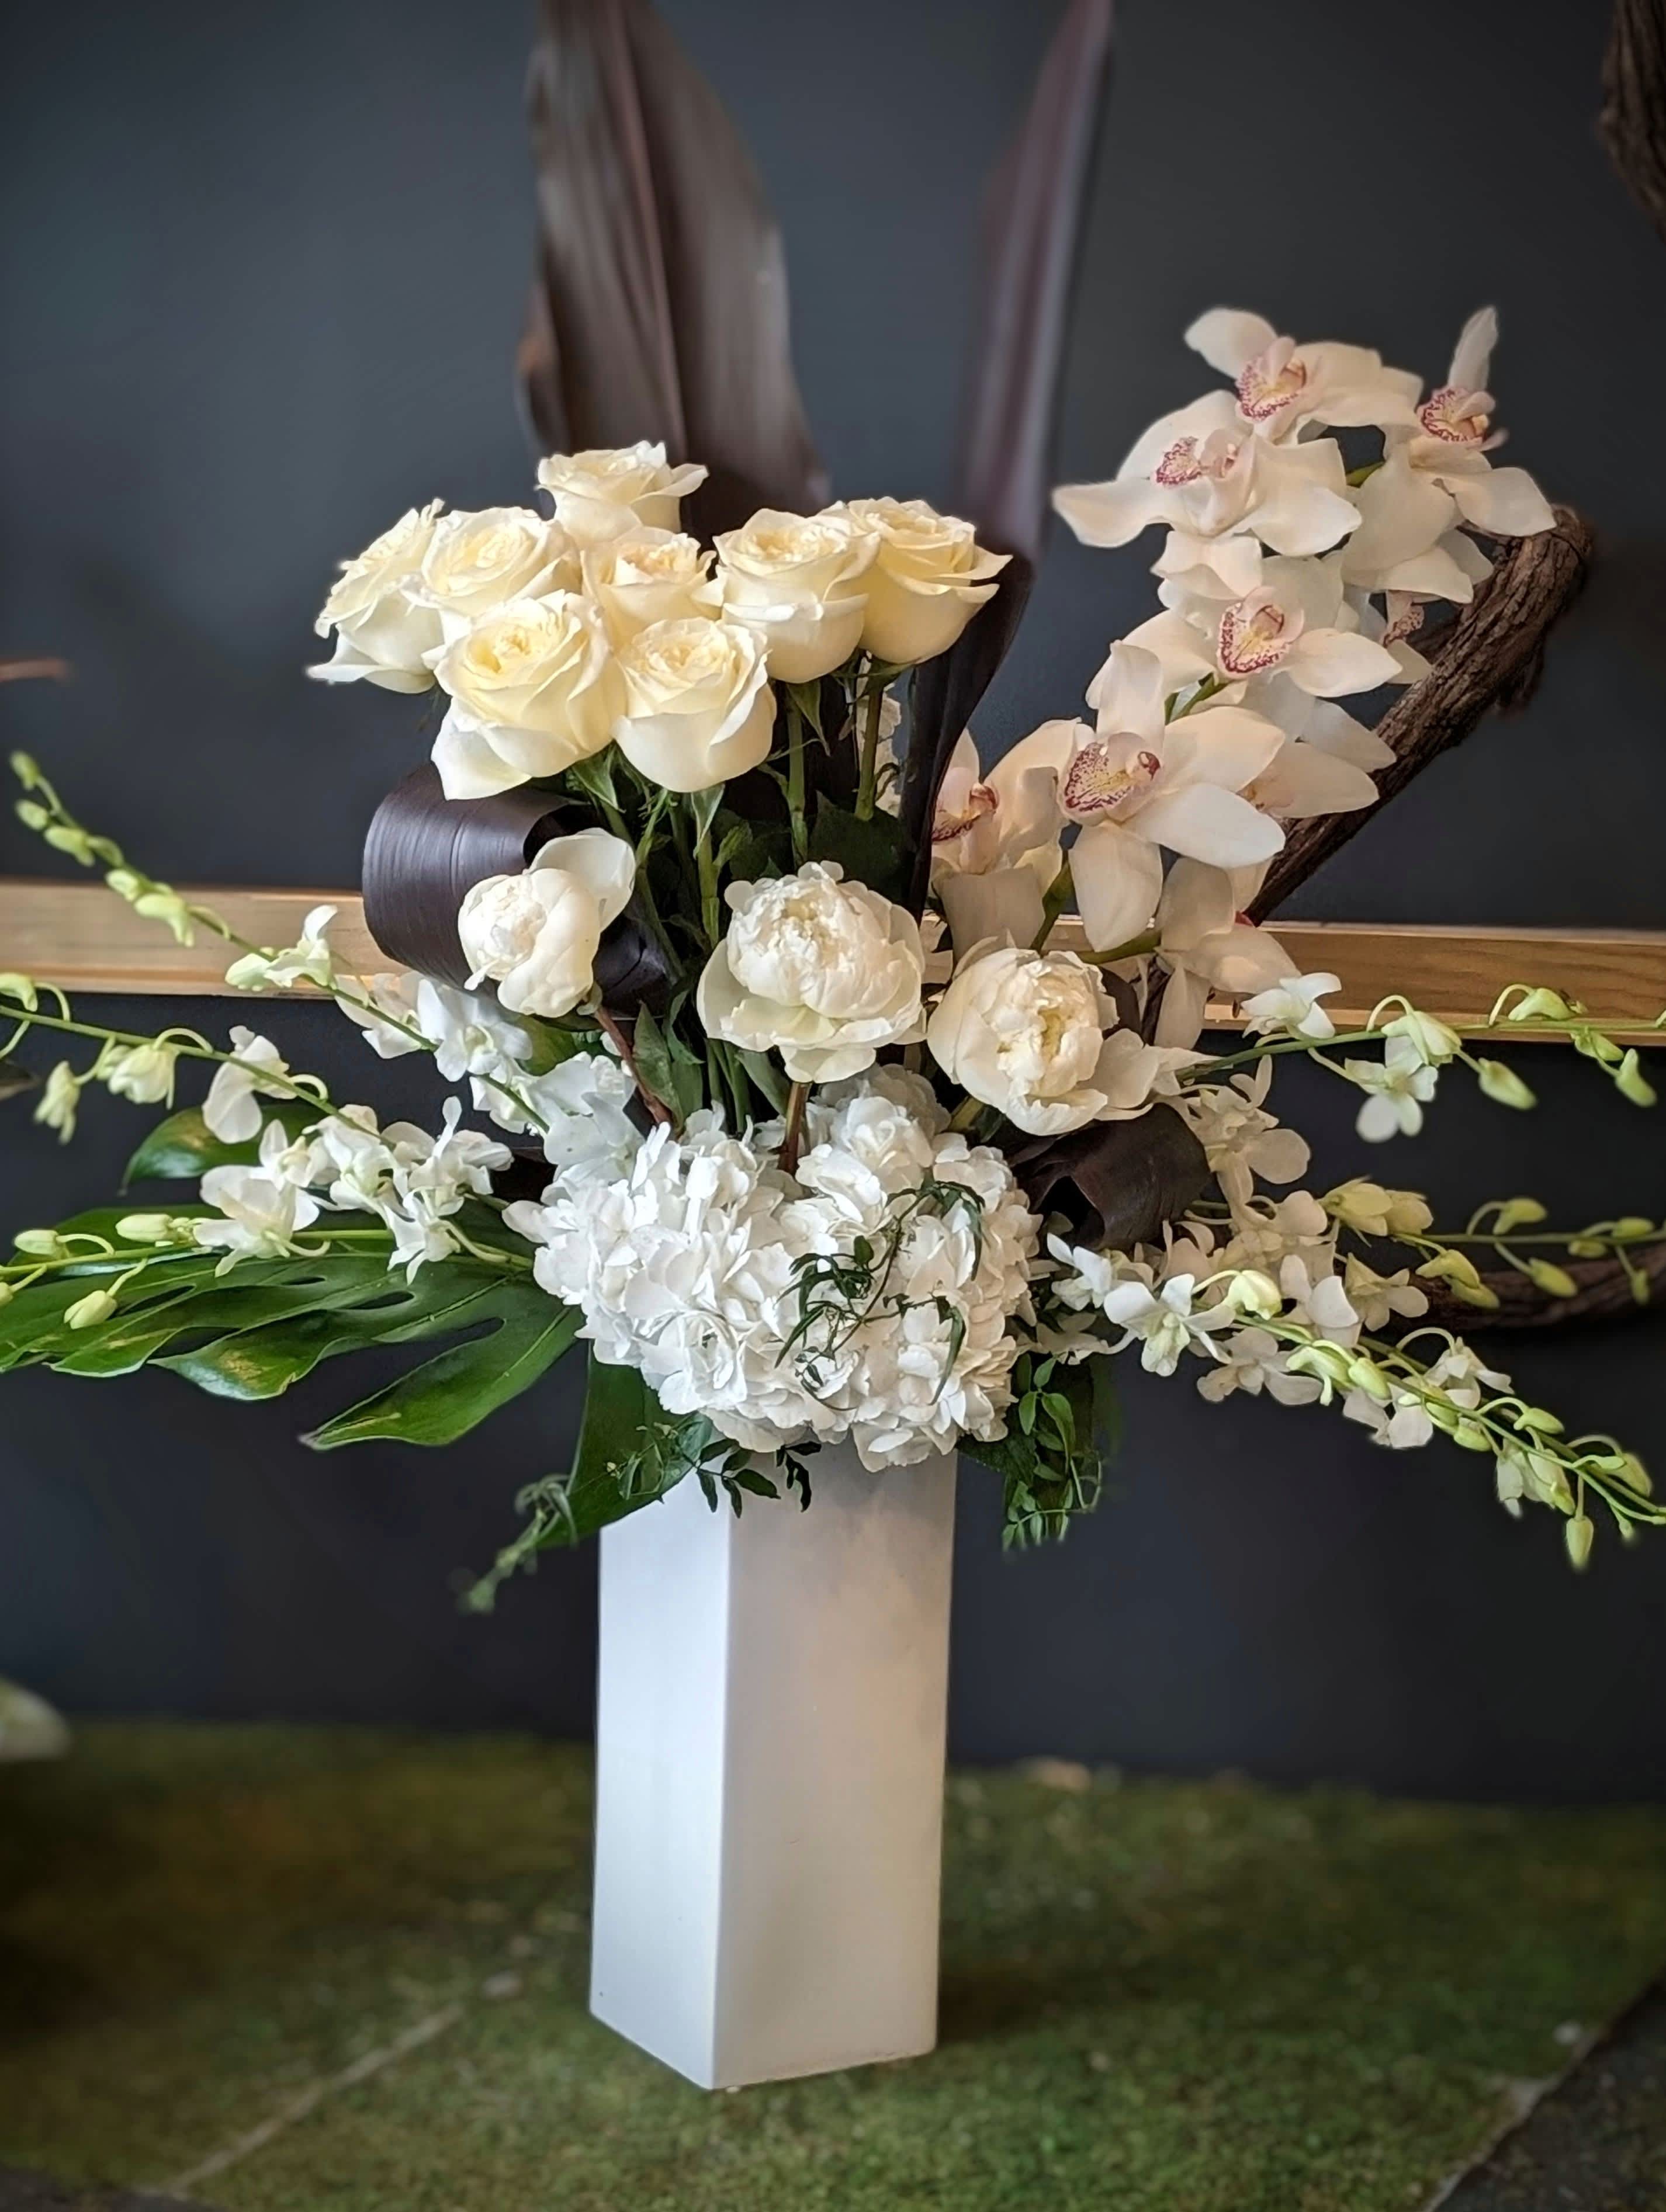 White Focal Stunner - Elegant and tall, white cymbidium orchids roses peonies, hydrangea and curled foliage.